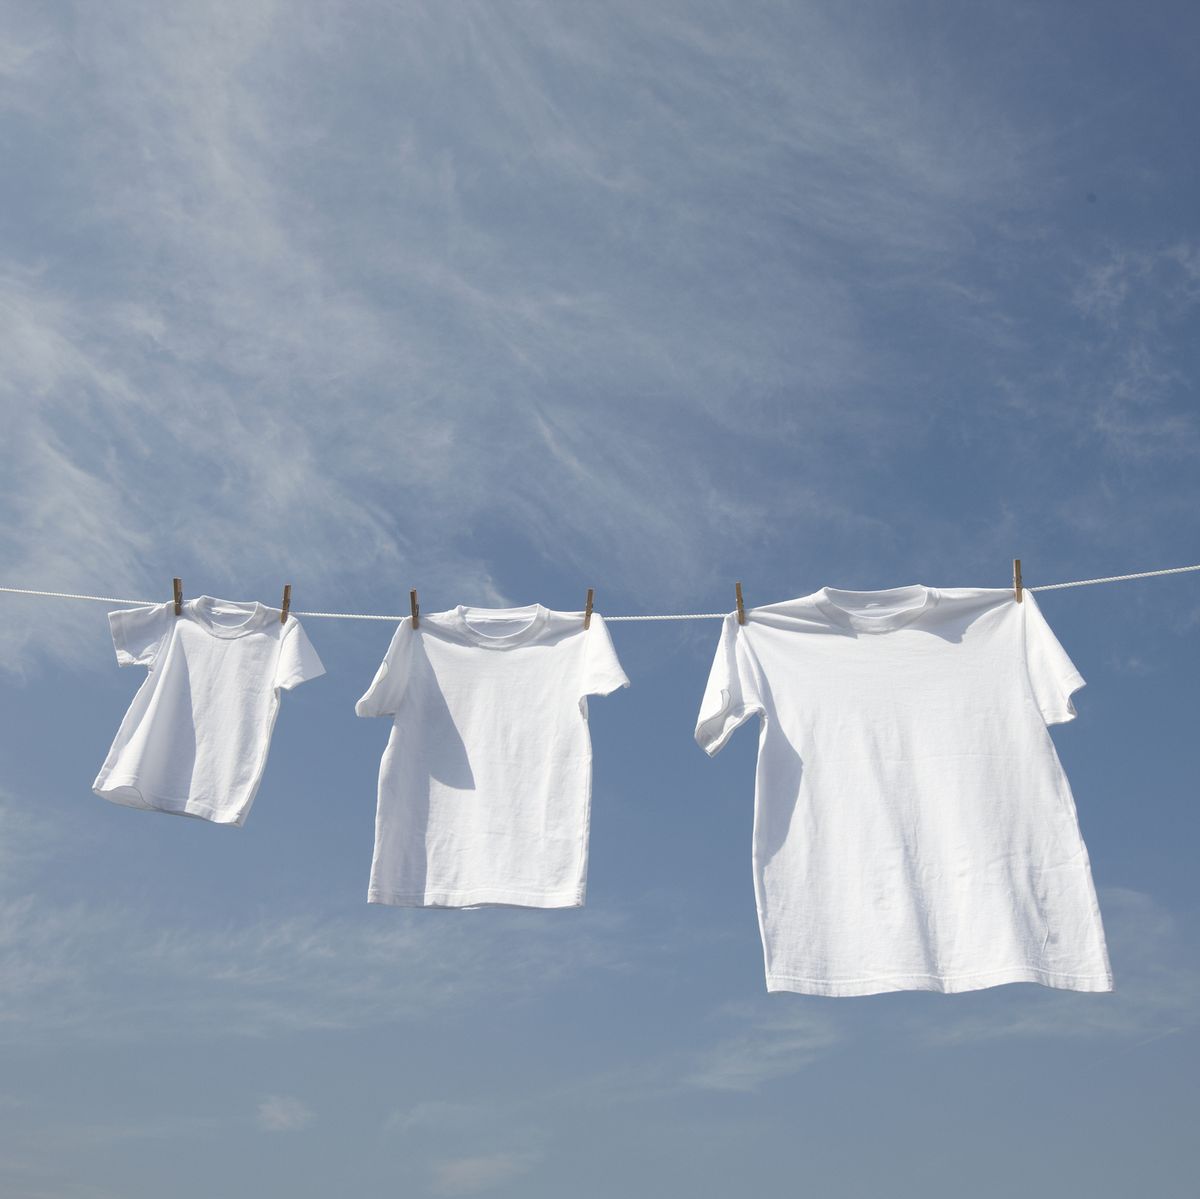 https://hips.hearstapps.com/hmg-prod.s3.amazonaws.com/images/white-t-shirts-in-a-row-on-washing-line-royalty-free-image-1595609036.jpg?crop=0.659xw:0.988xh;0.167xw,0&resize=1200:*